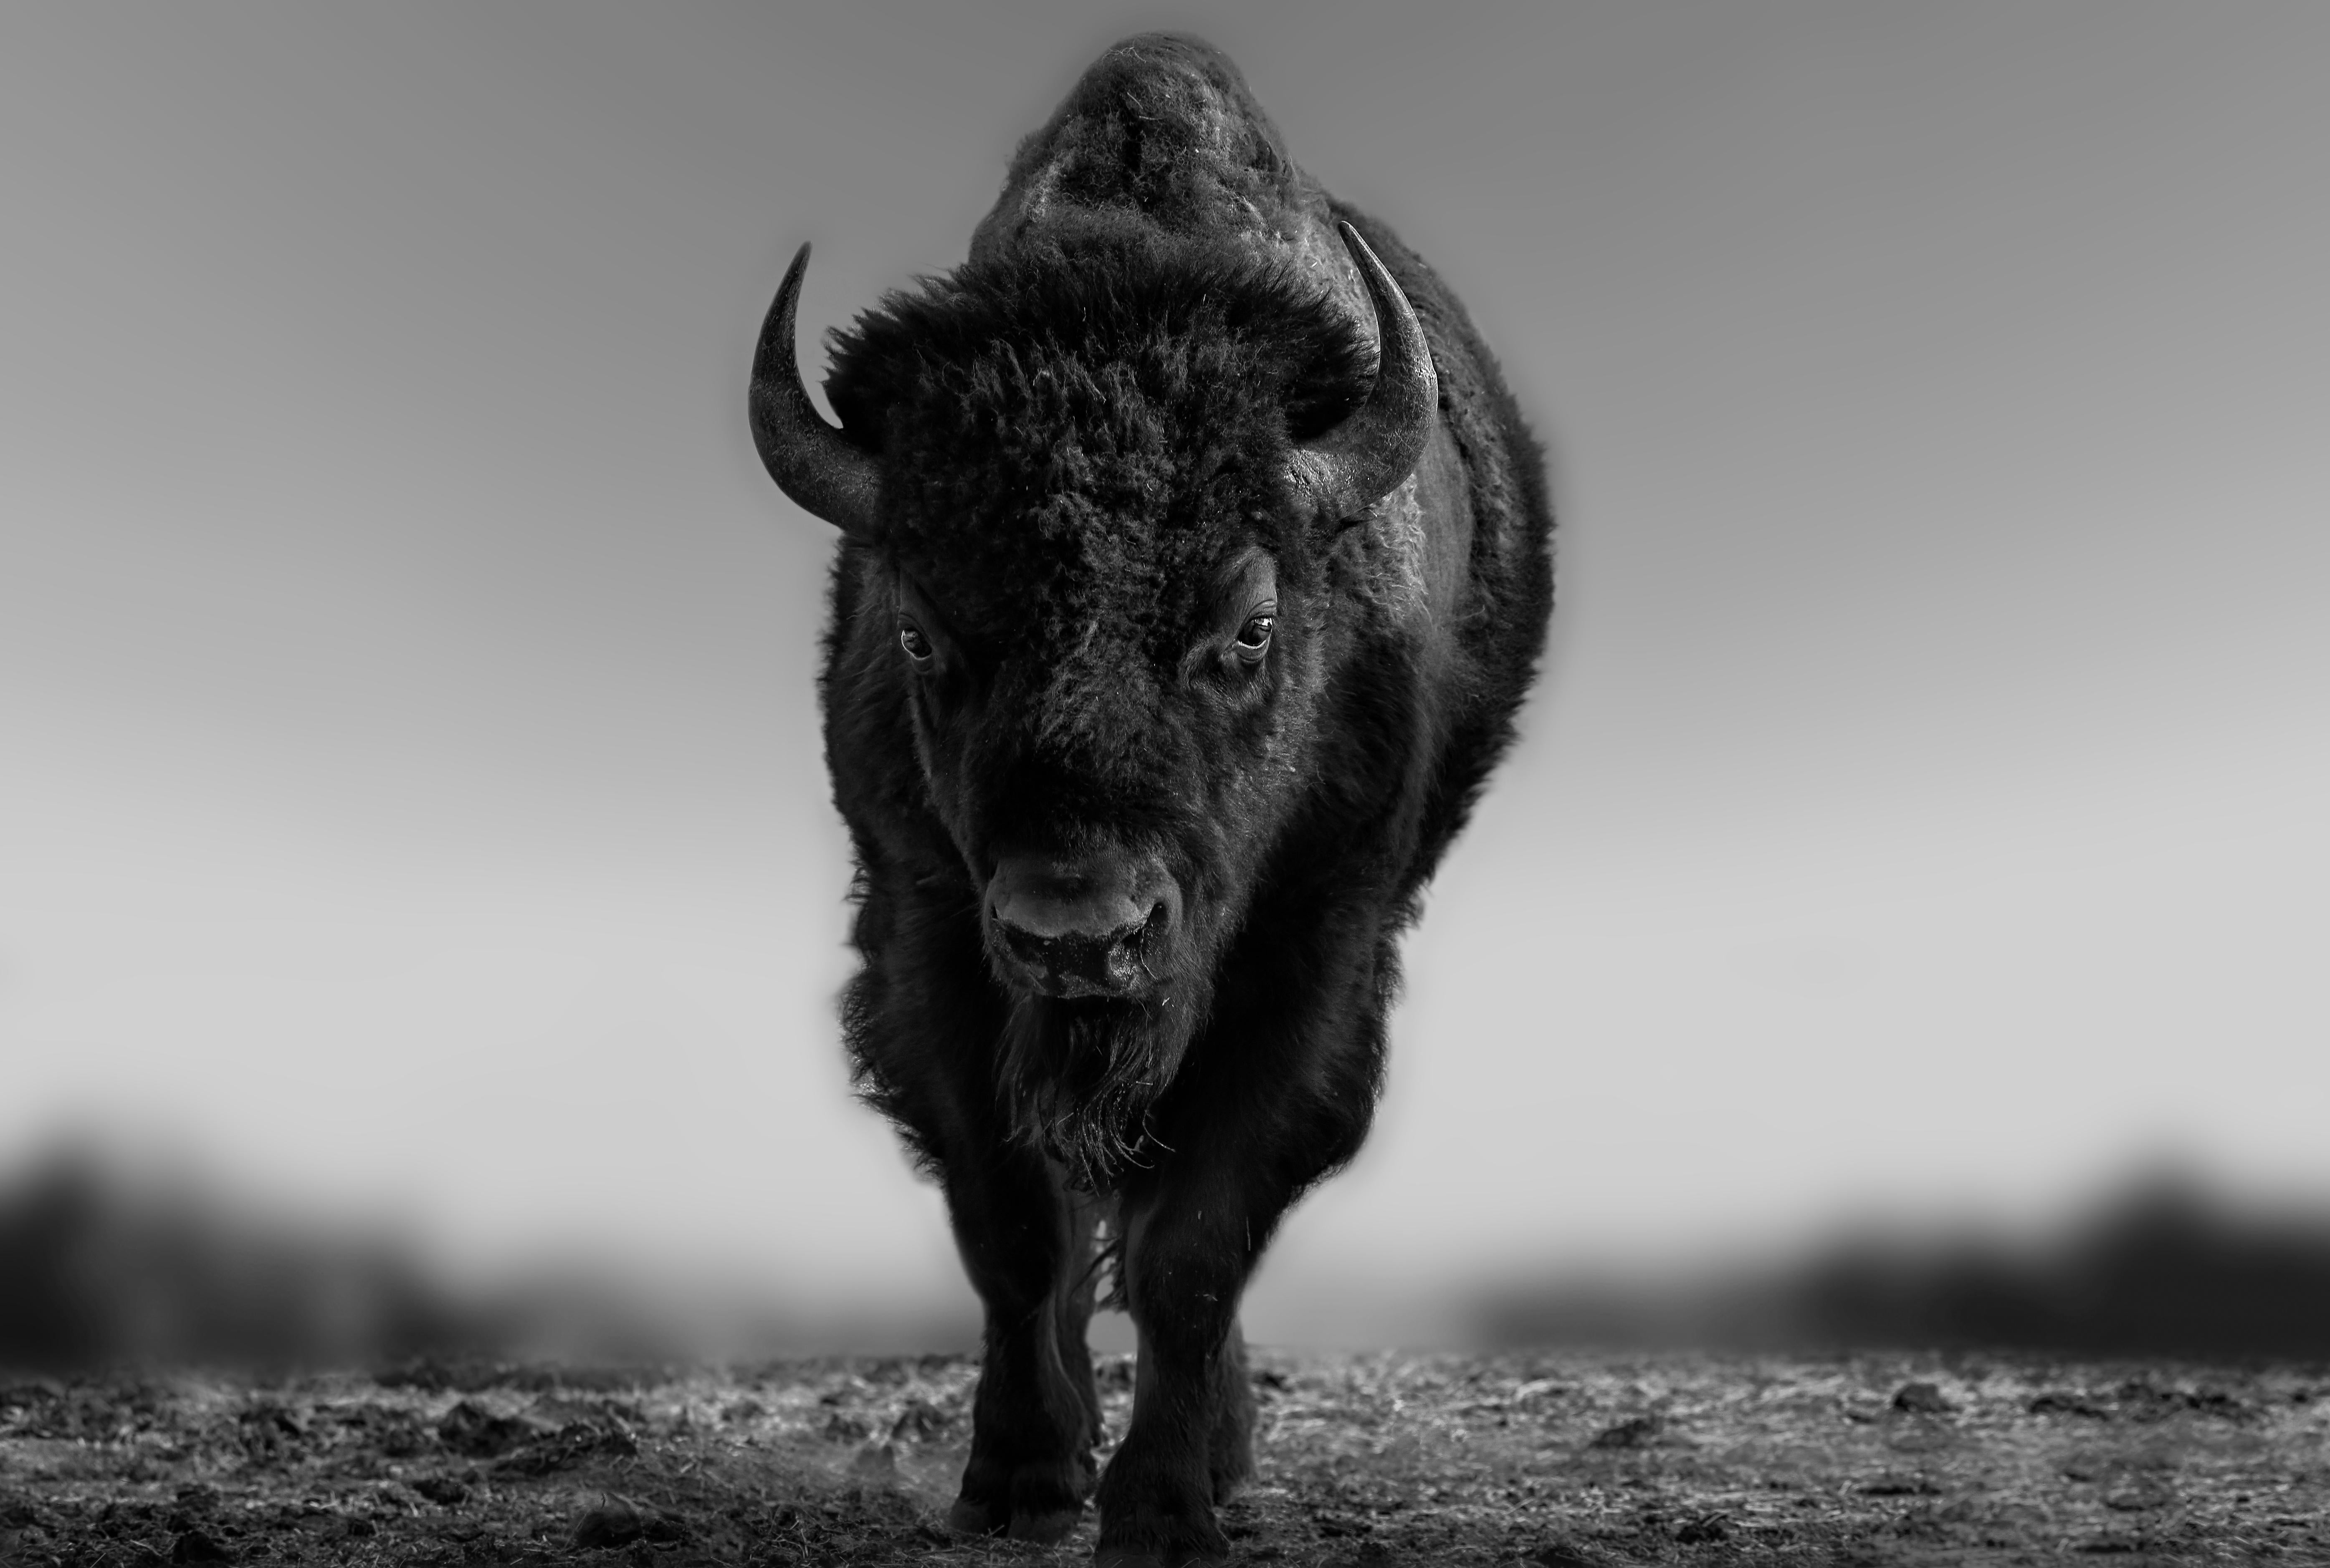 Shane Russeck Animal Print - Black and White Photography of Bison, Buffalo "The Beast" 50x60 Photograph